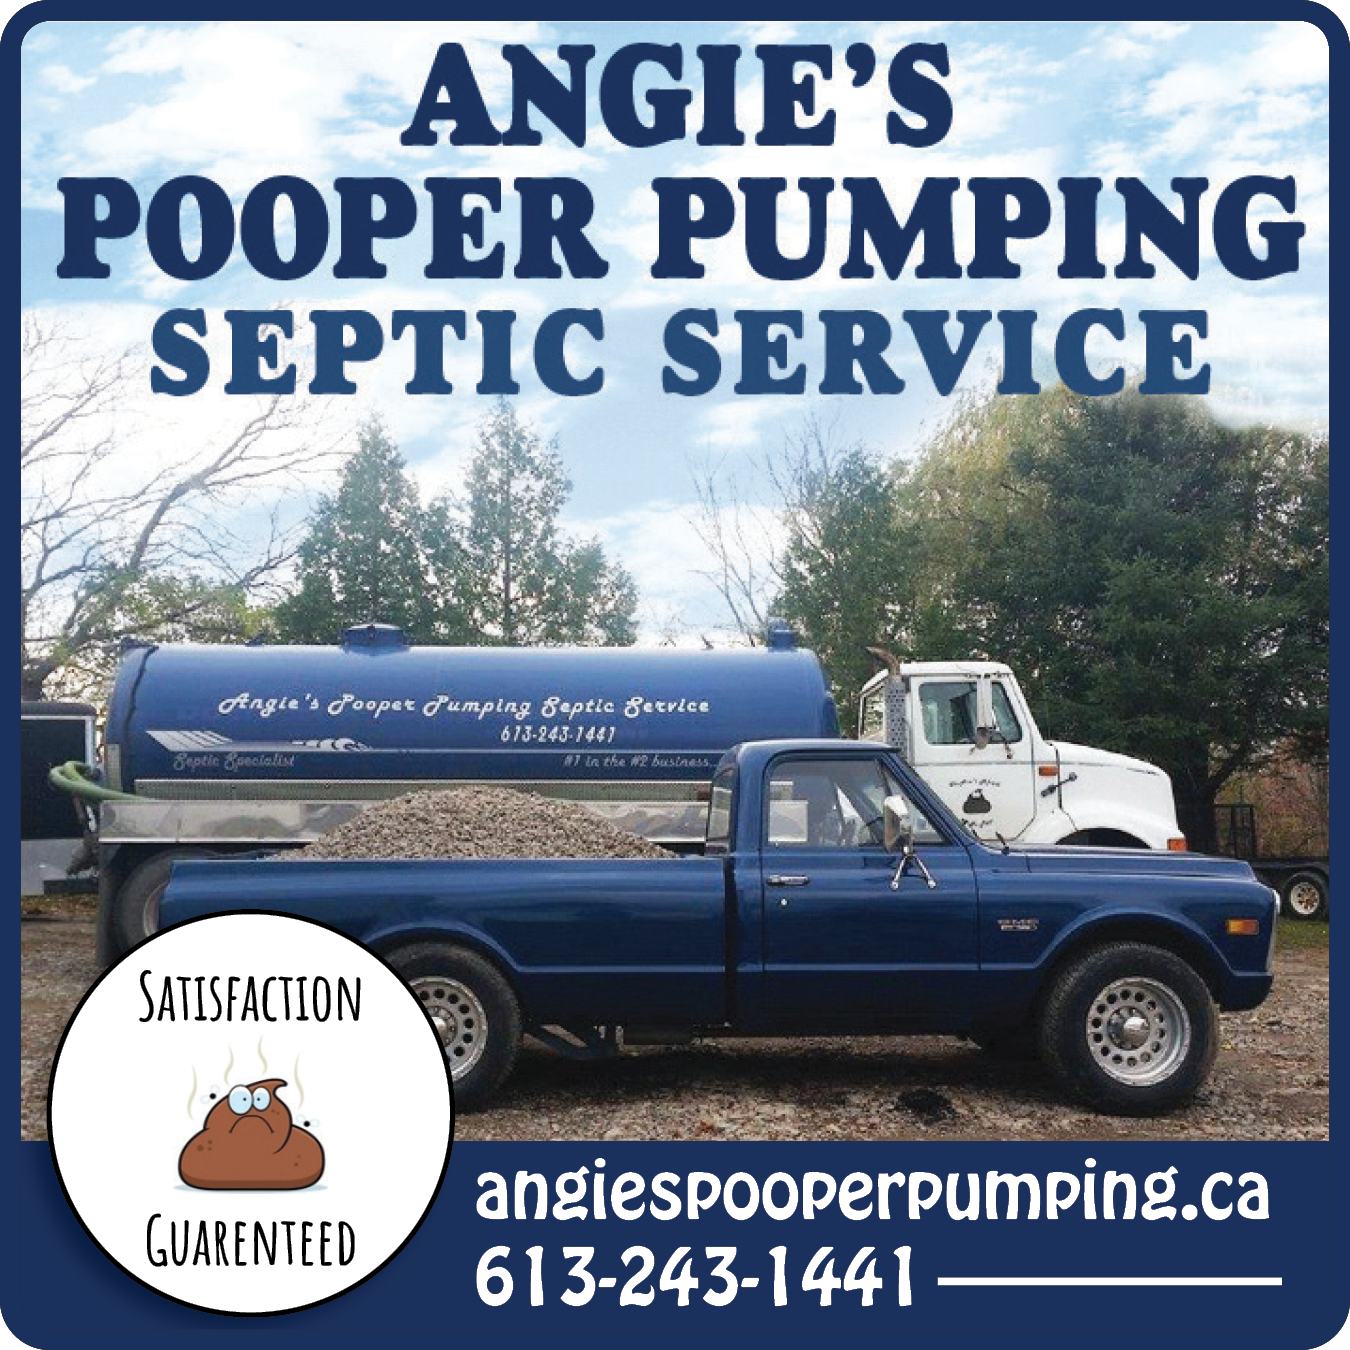 Angie's Pooper Pumping Sceptic Service